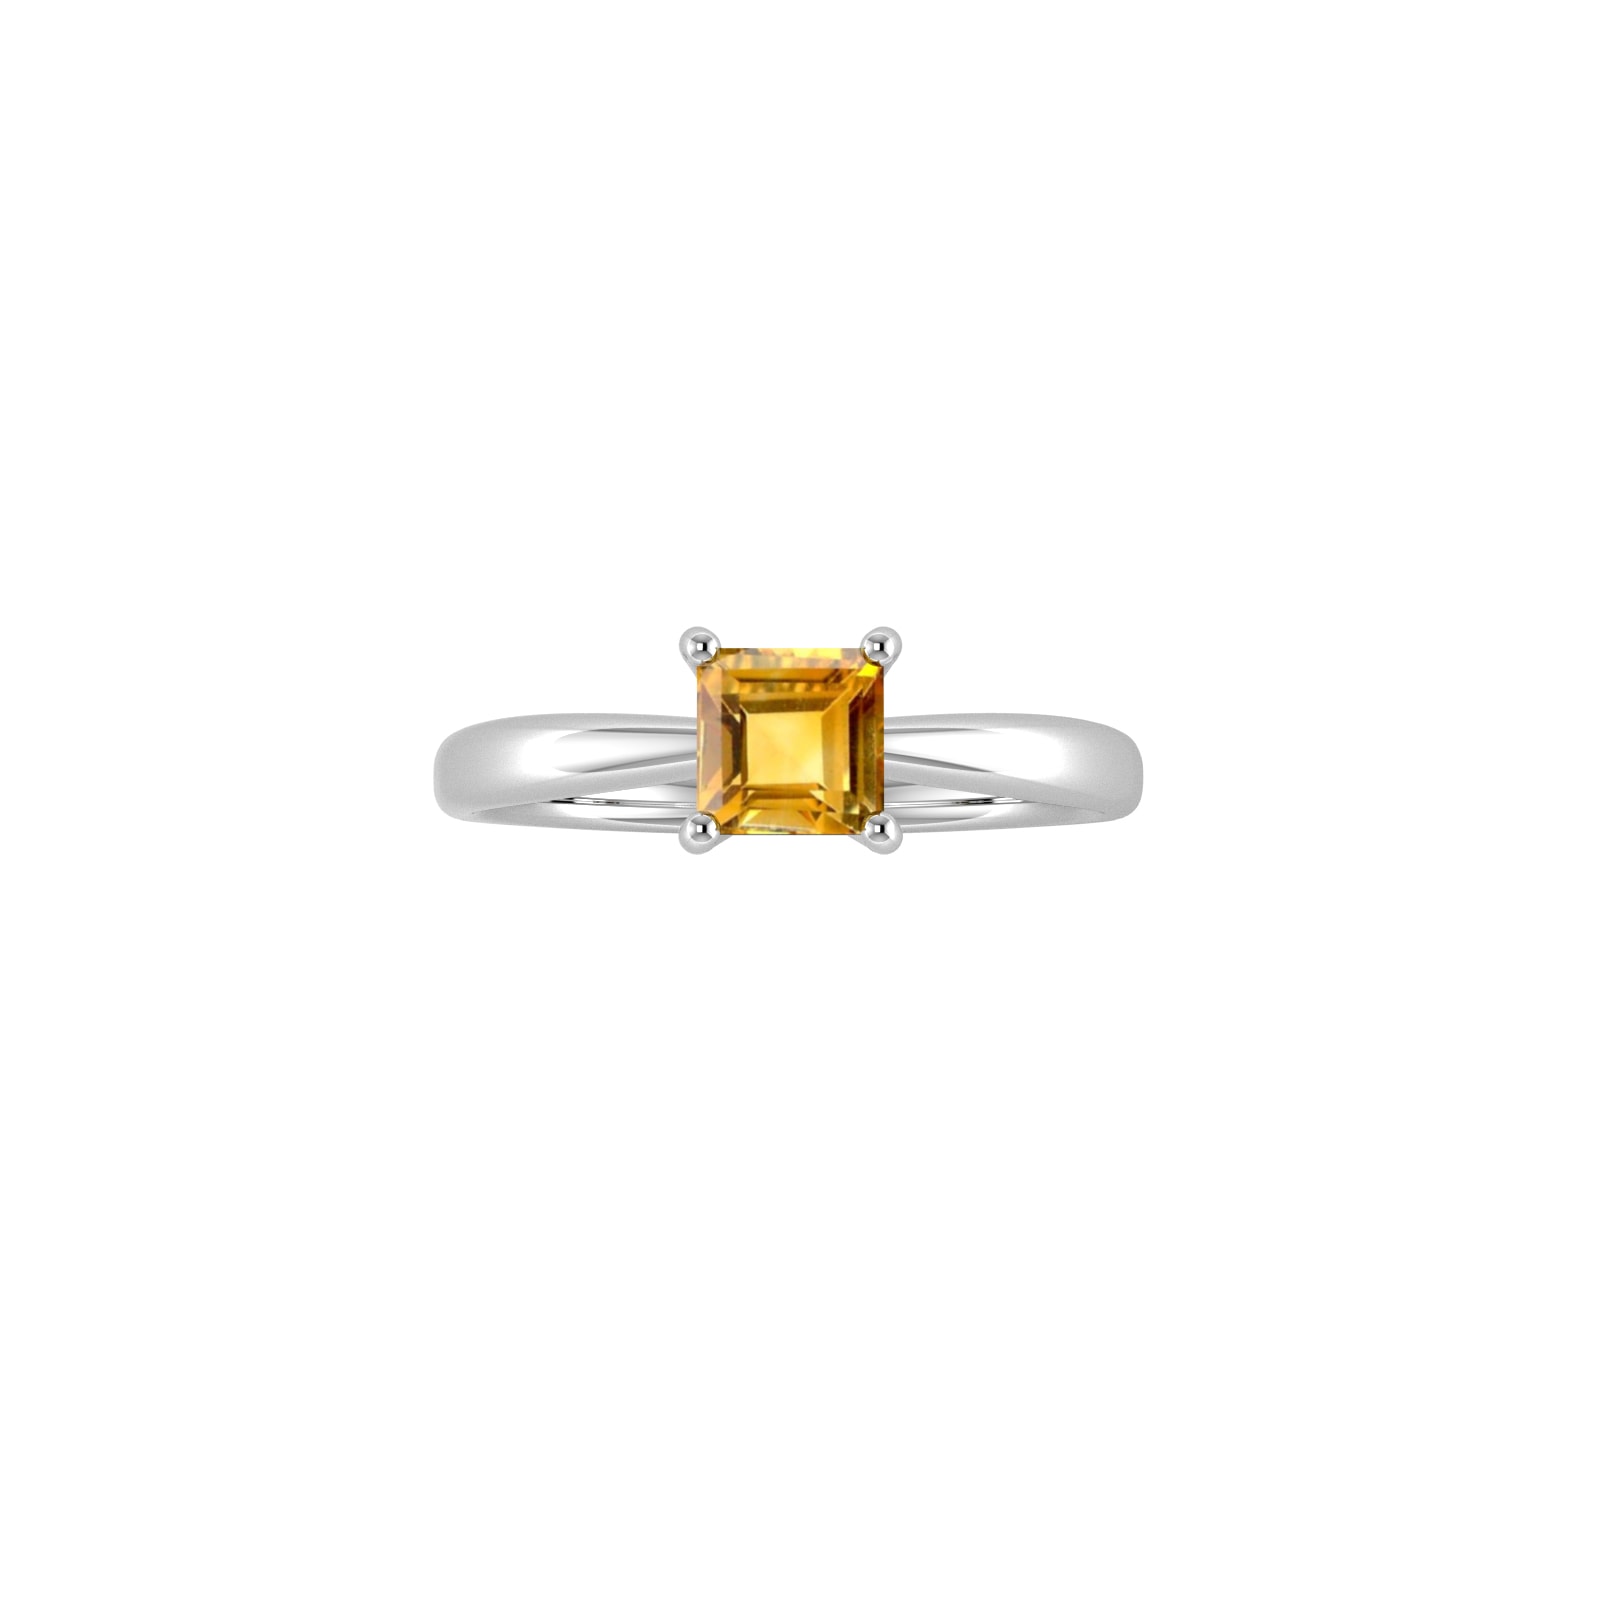 9ct White Gold 4 Claw Square Citrine 5mm x 5mm Ring- Ring Size M